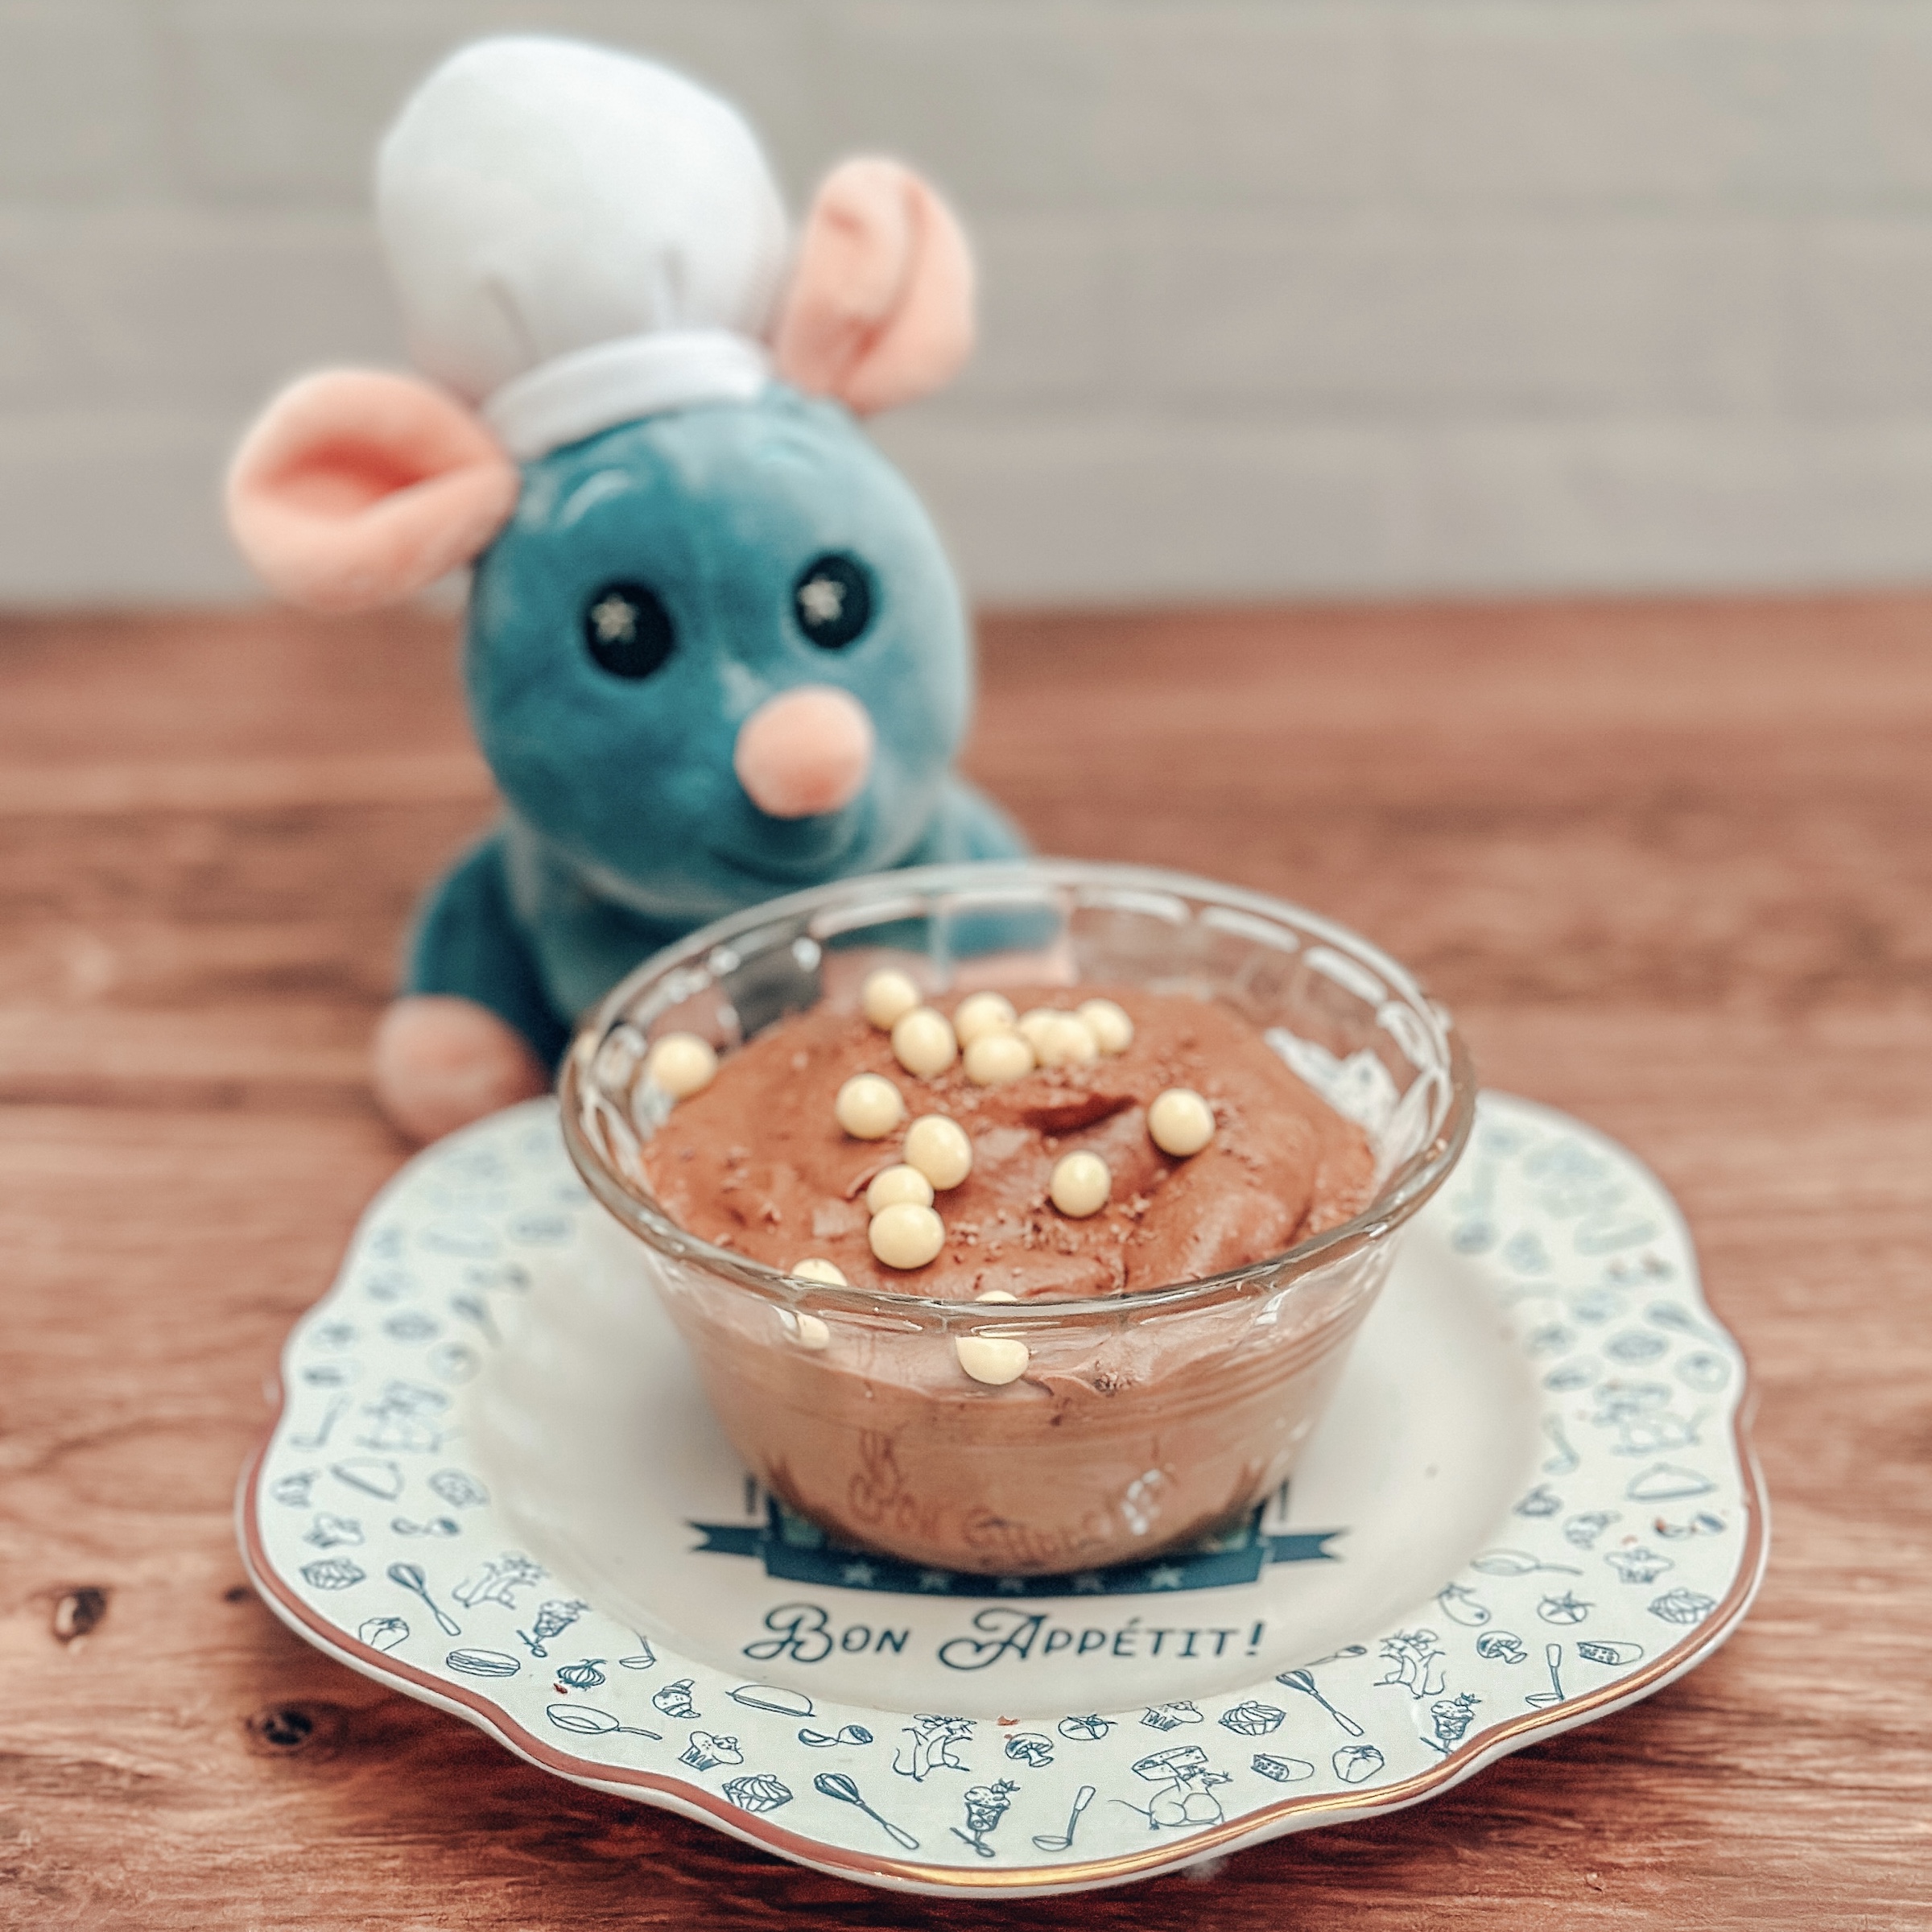 Les Halles Mousse au Chocolat in a bowl with plush Remy and Emil